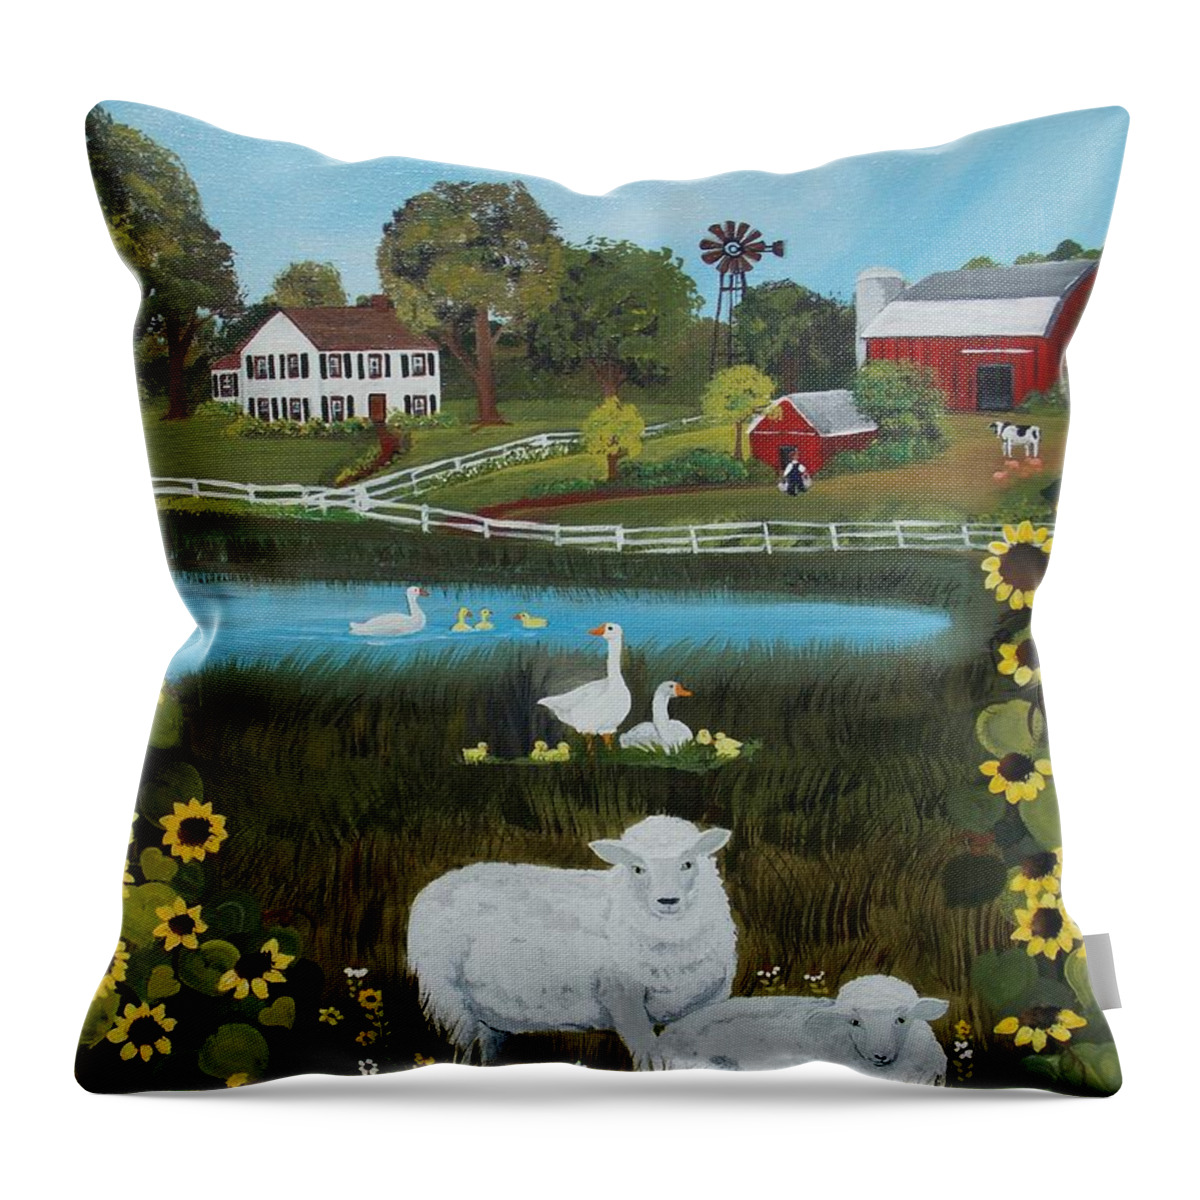 Sheep Throw Pillow featuring the painting Animal Farm by Virginia Coyle